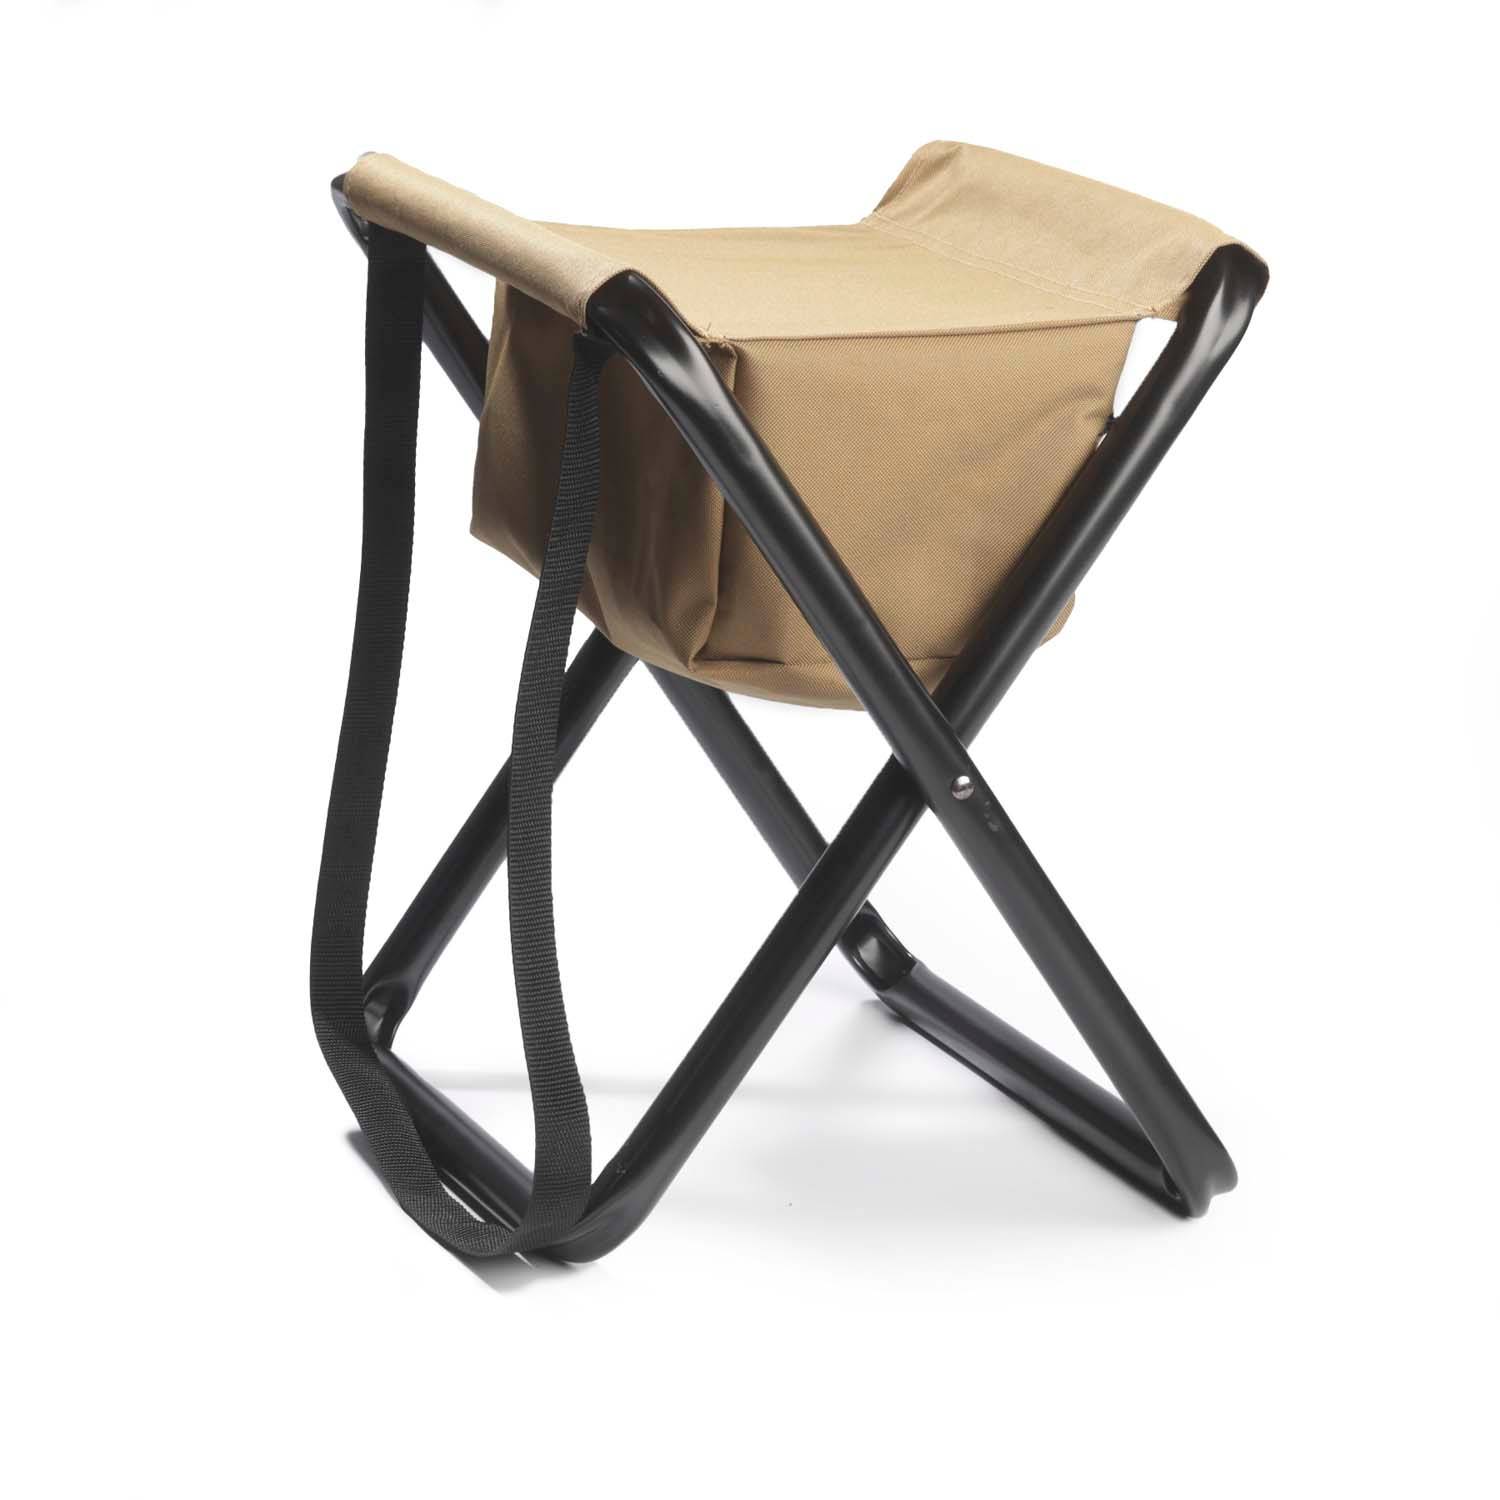 Rothco Deluxe On-the-Go Folding Stool